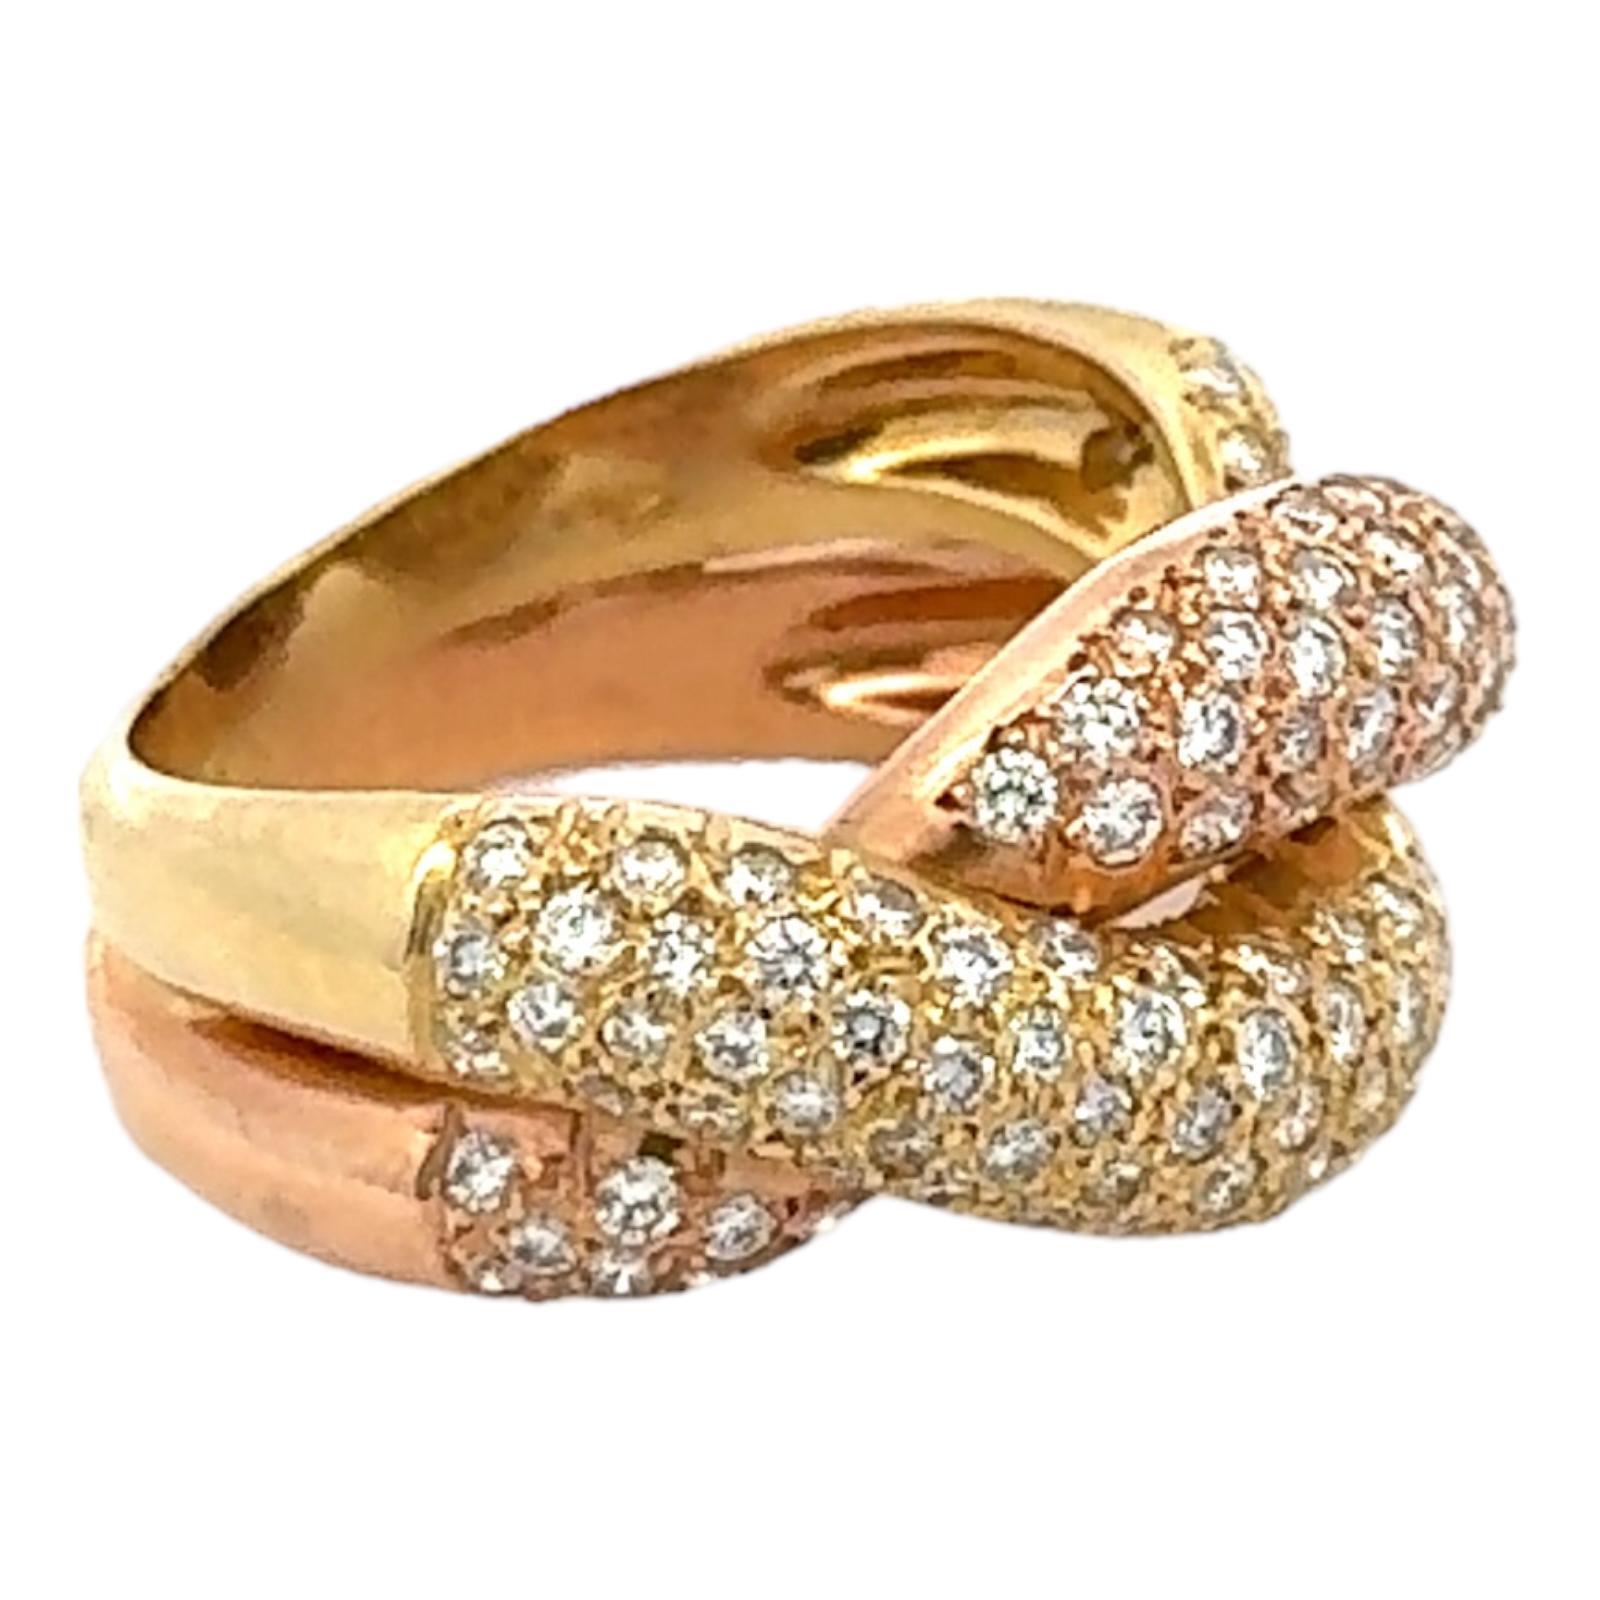 Round Brilliant Cut Diamond Crossover 18 Karat Yellow & Rose Gold Band Ring In Excellent Condition For Sale In Boca Raton, FL